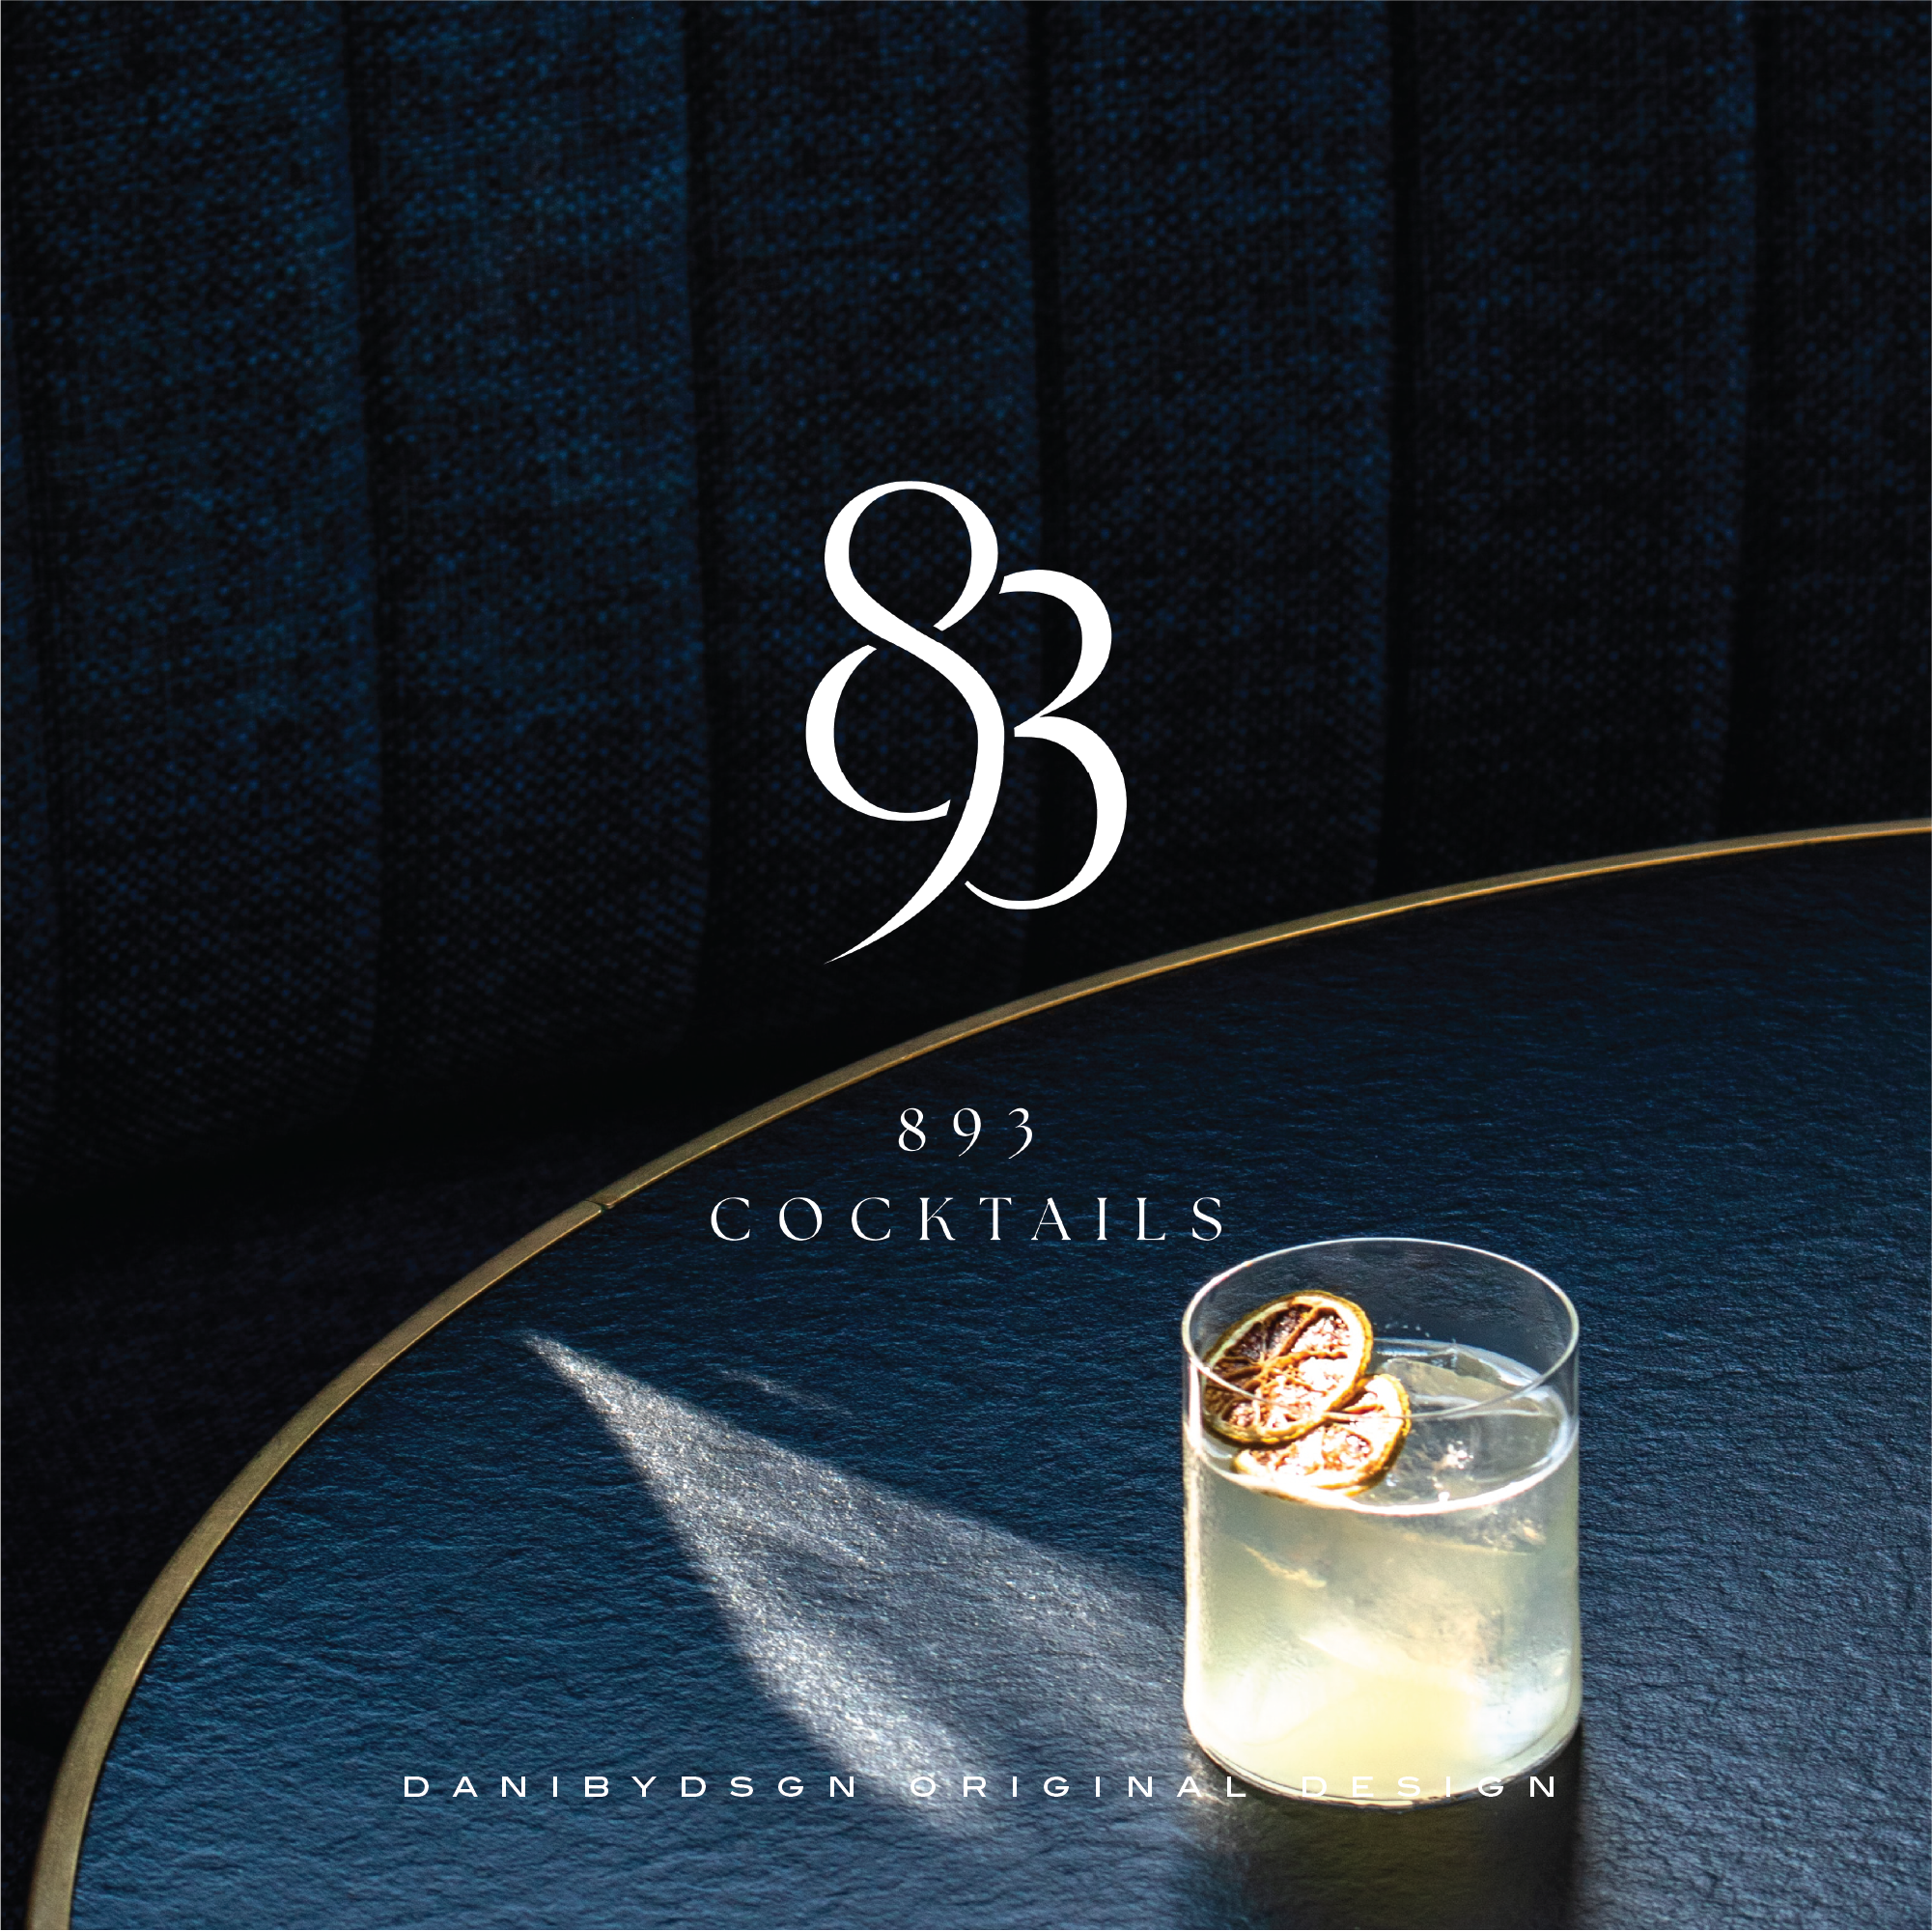 Initial monogram logo design for 893 Cocktails.  The 893 is overlapped to create a destinct and striking design.  Elegant and luxury branding.  Pic is of the logo  and a close up of a cocktail in a short glass on a black textured table in a dark room setting.